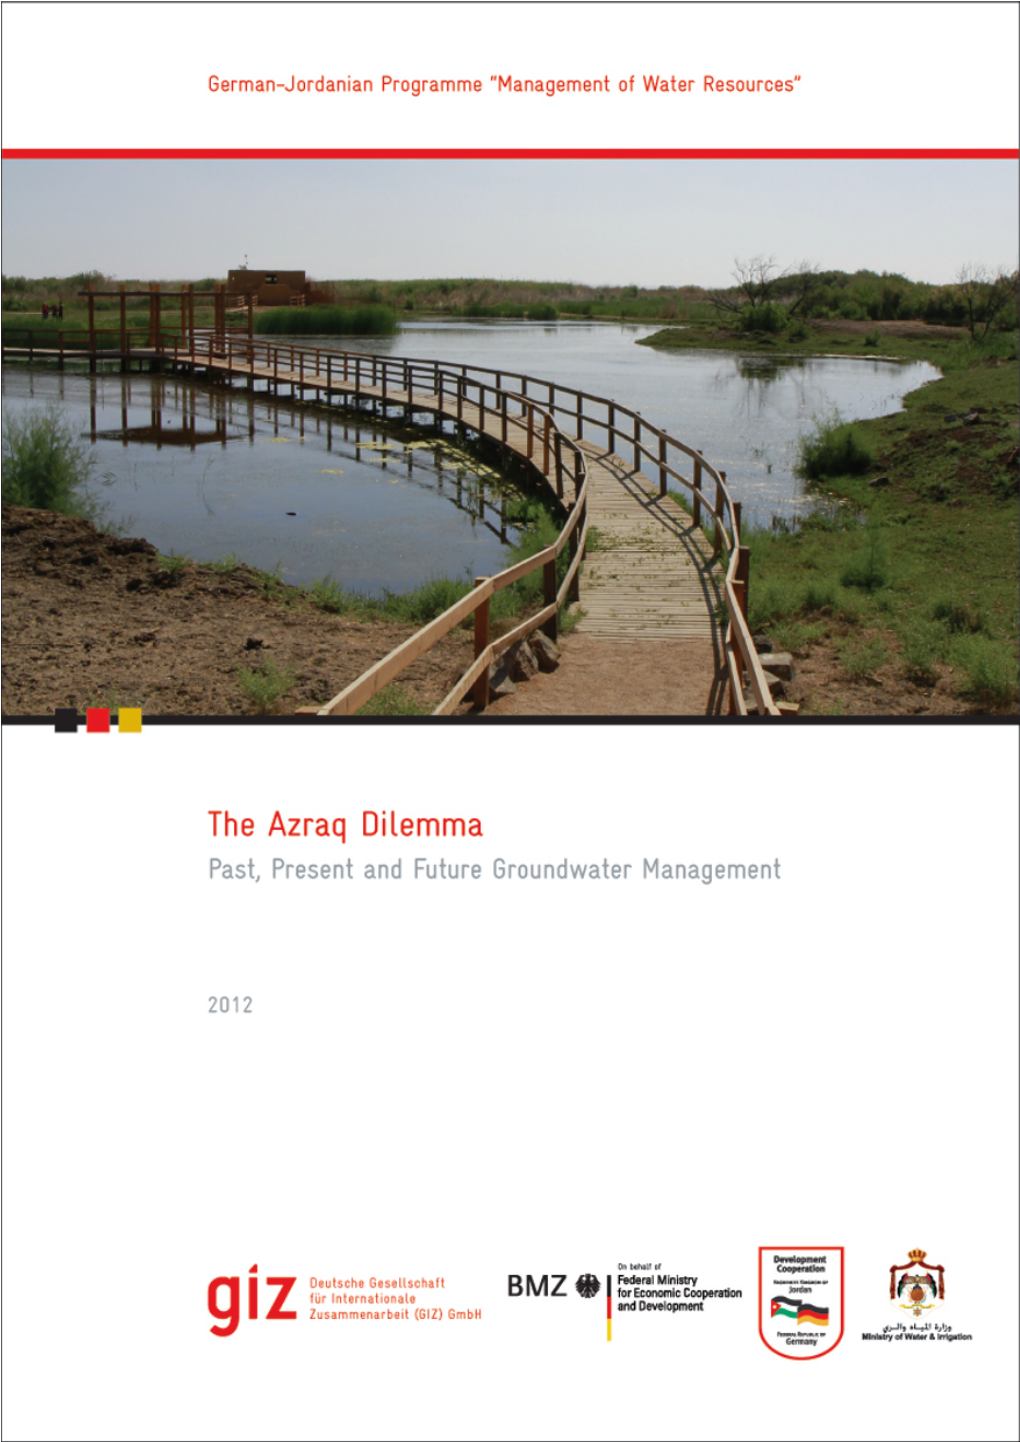 The Azraq Dilemma: Past, Present and Future Groundwater Management German-Jordanian Programme “Management of Water Resources” 